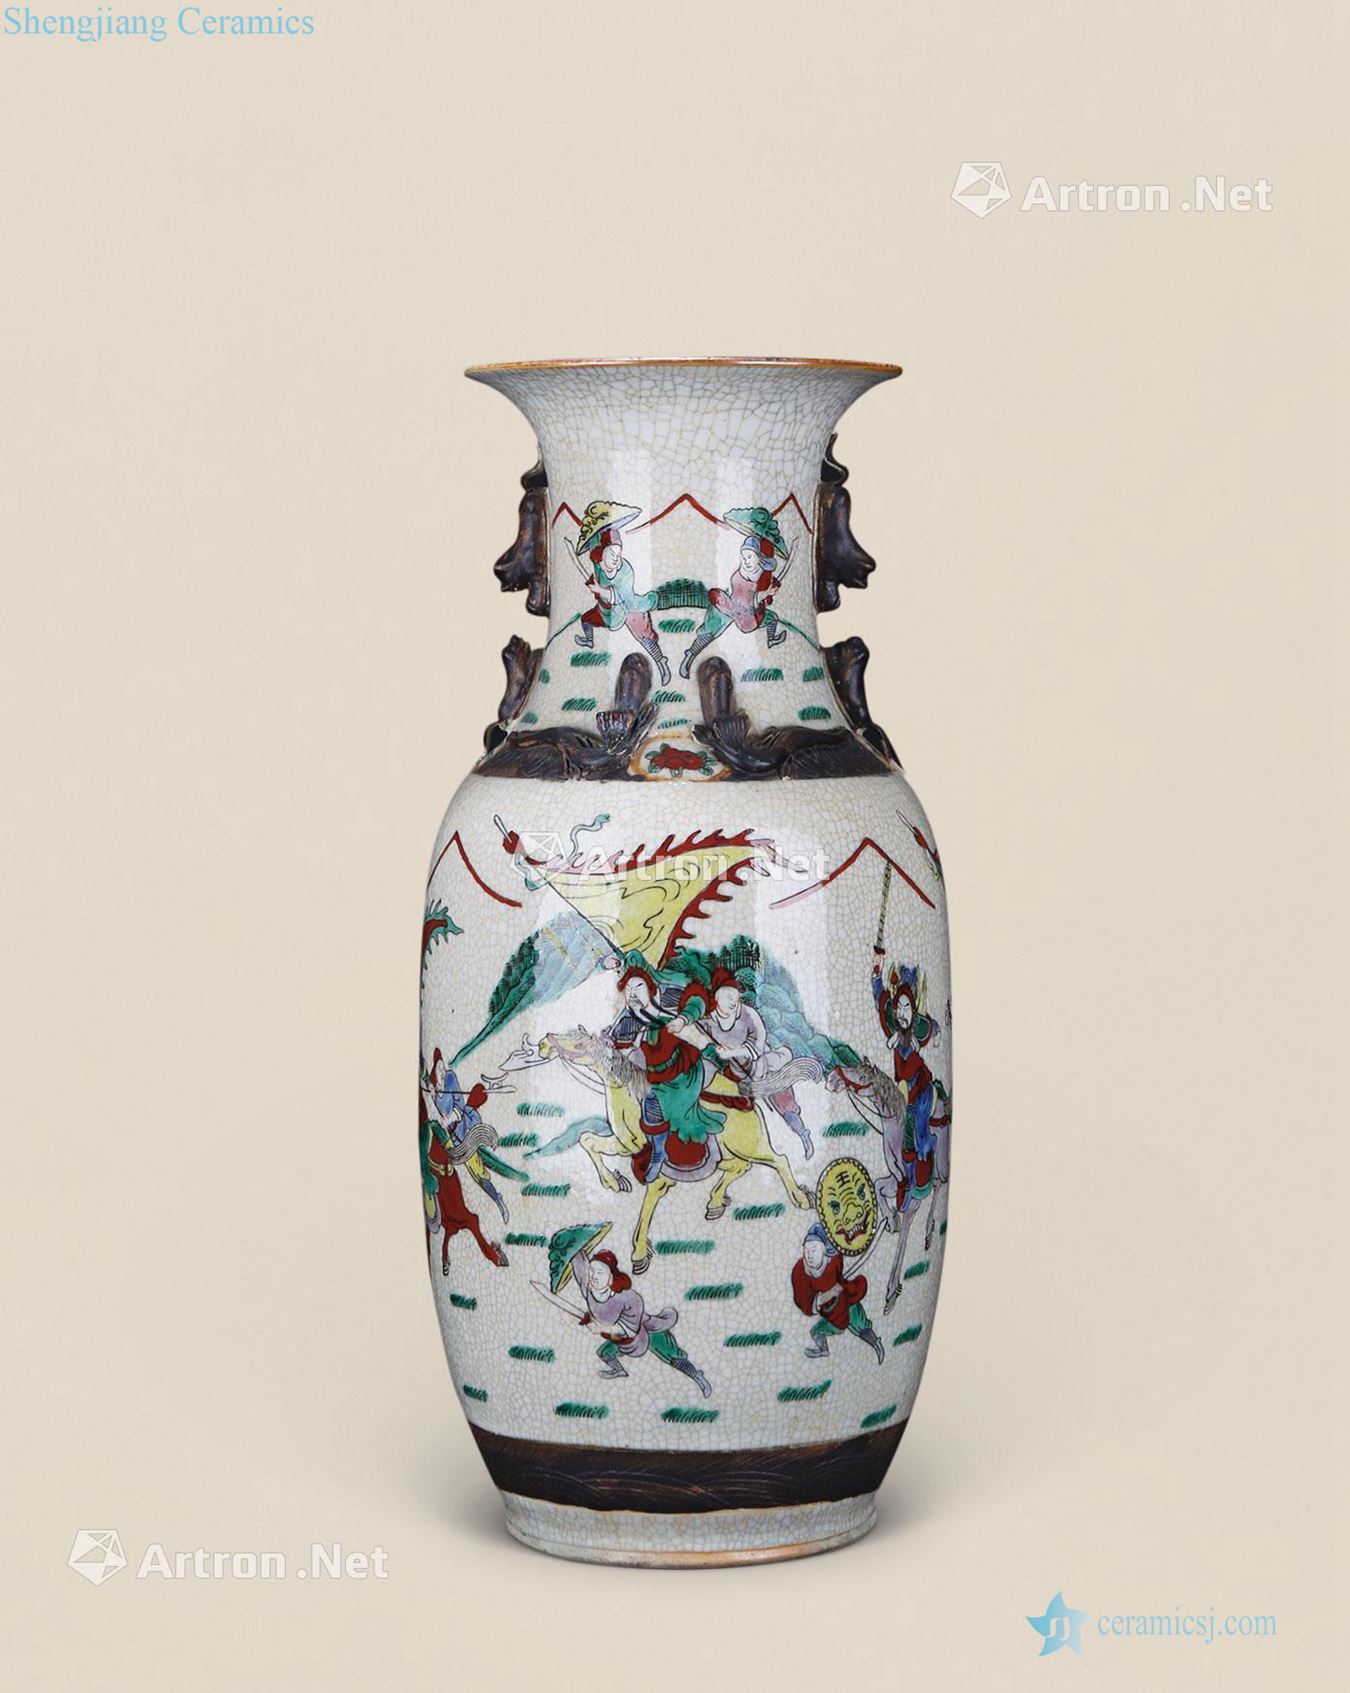 The elder brother of the qing colorful knife horse character figure bottles